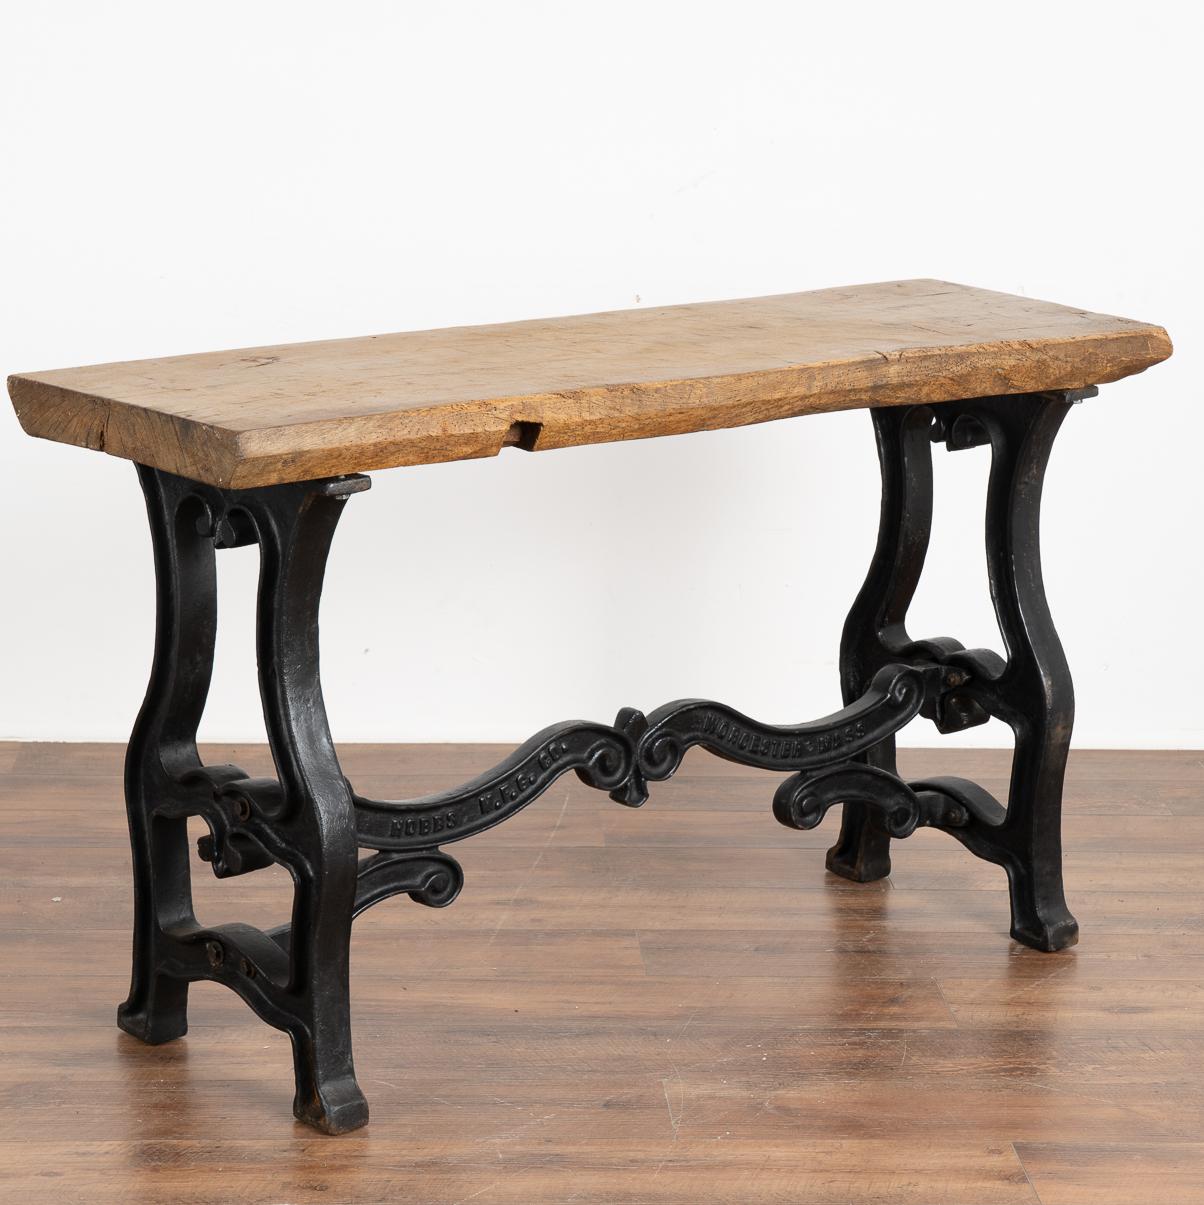 This impressive console table draws you to reach out and touch it due to it's thick hard wood slab top that originally served as a work table.
The (new) cast iron legs have a vintage look adding stability and an industrial look.
The rustic appeal